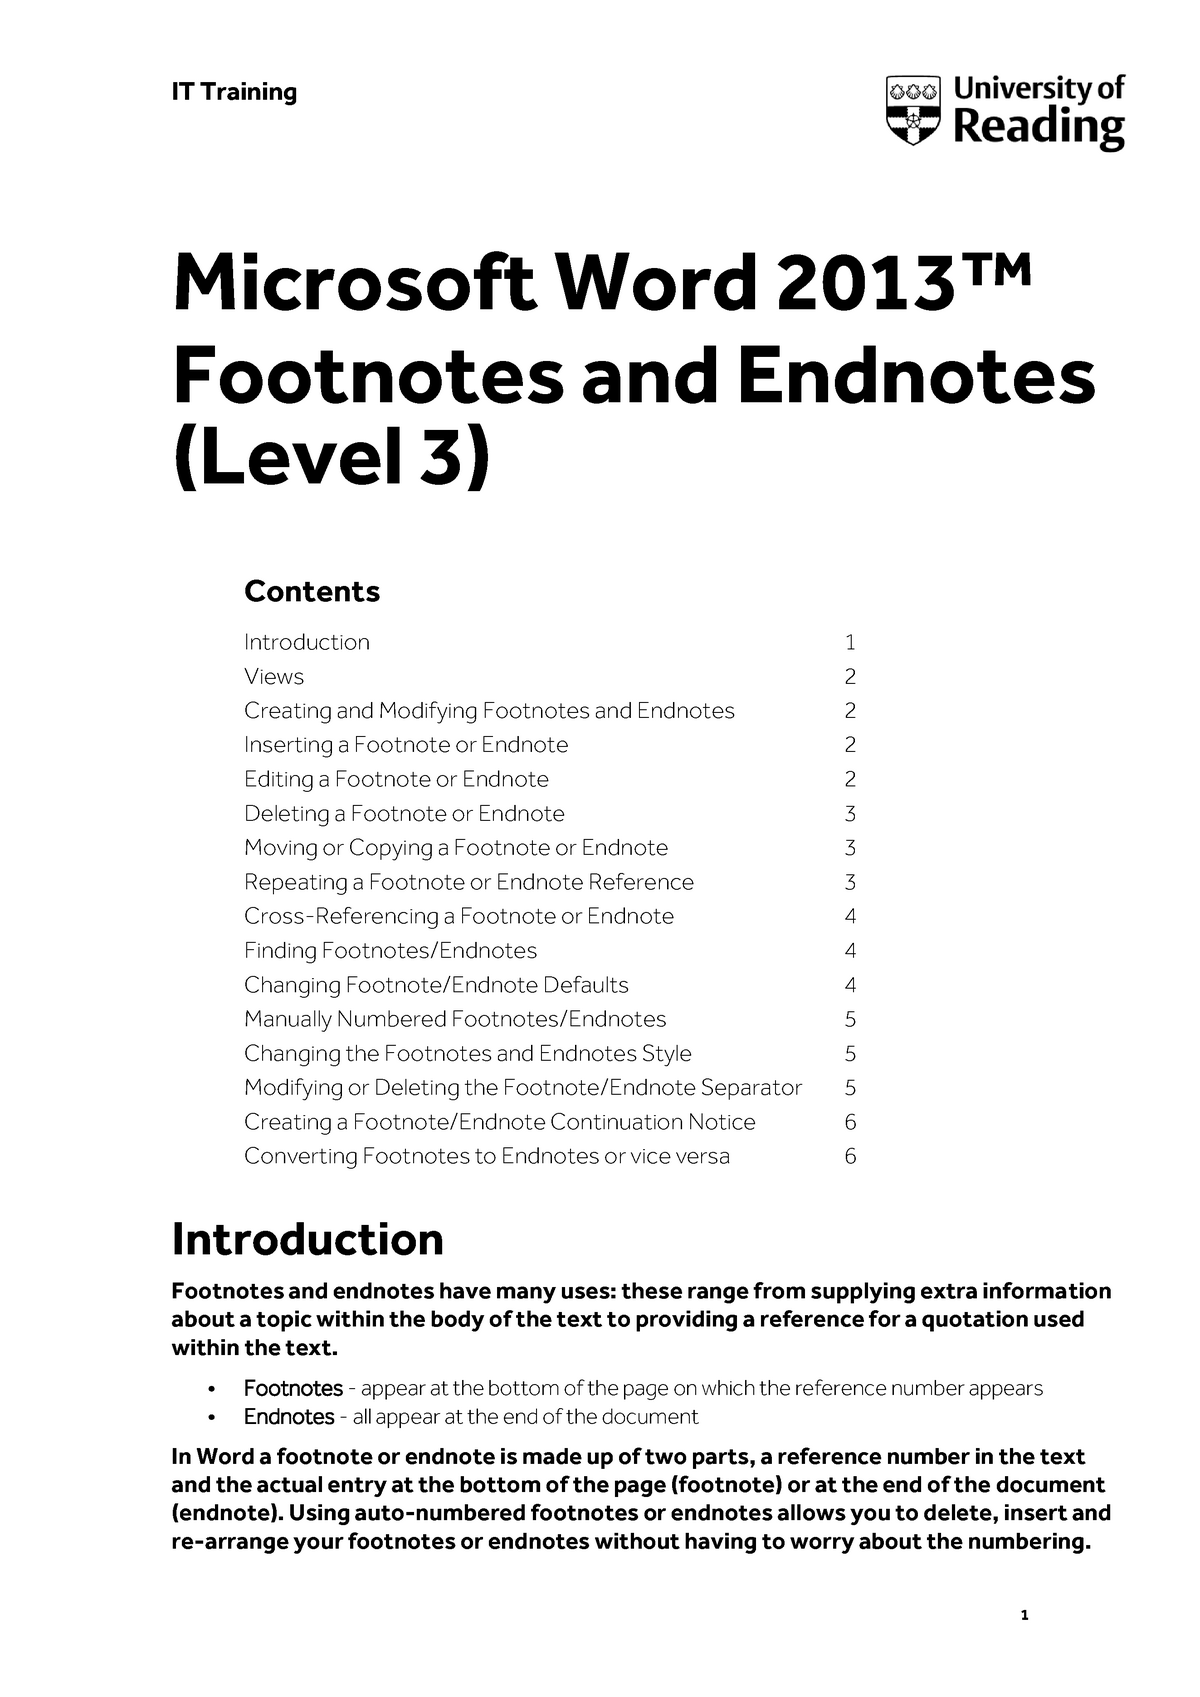 creating footnotes in word 2013